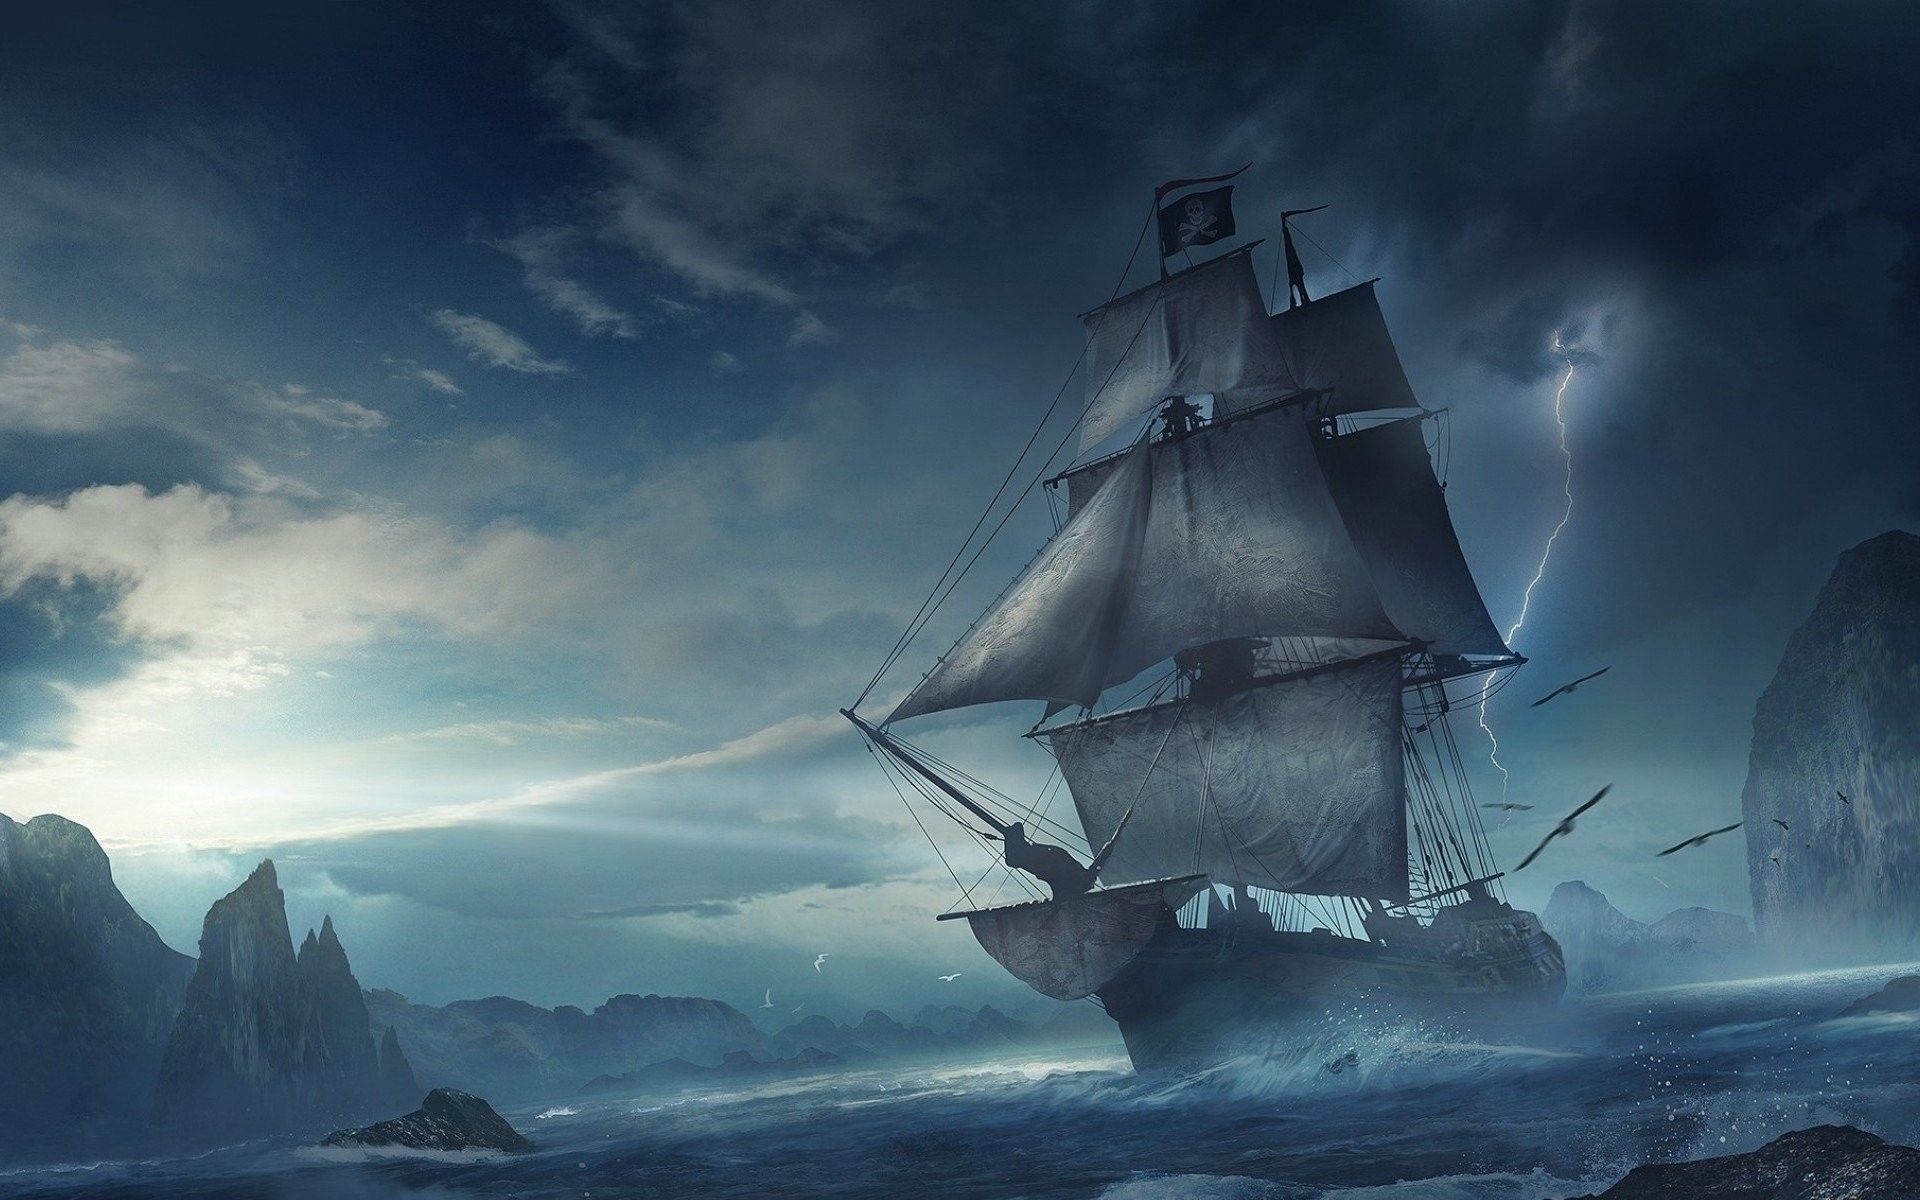 A ship sailing in the ocean with storm clouds - Pirate